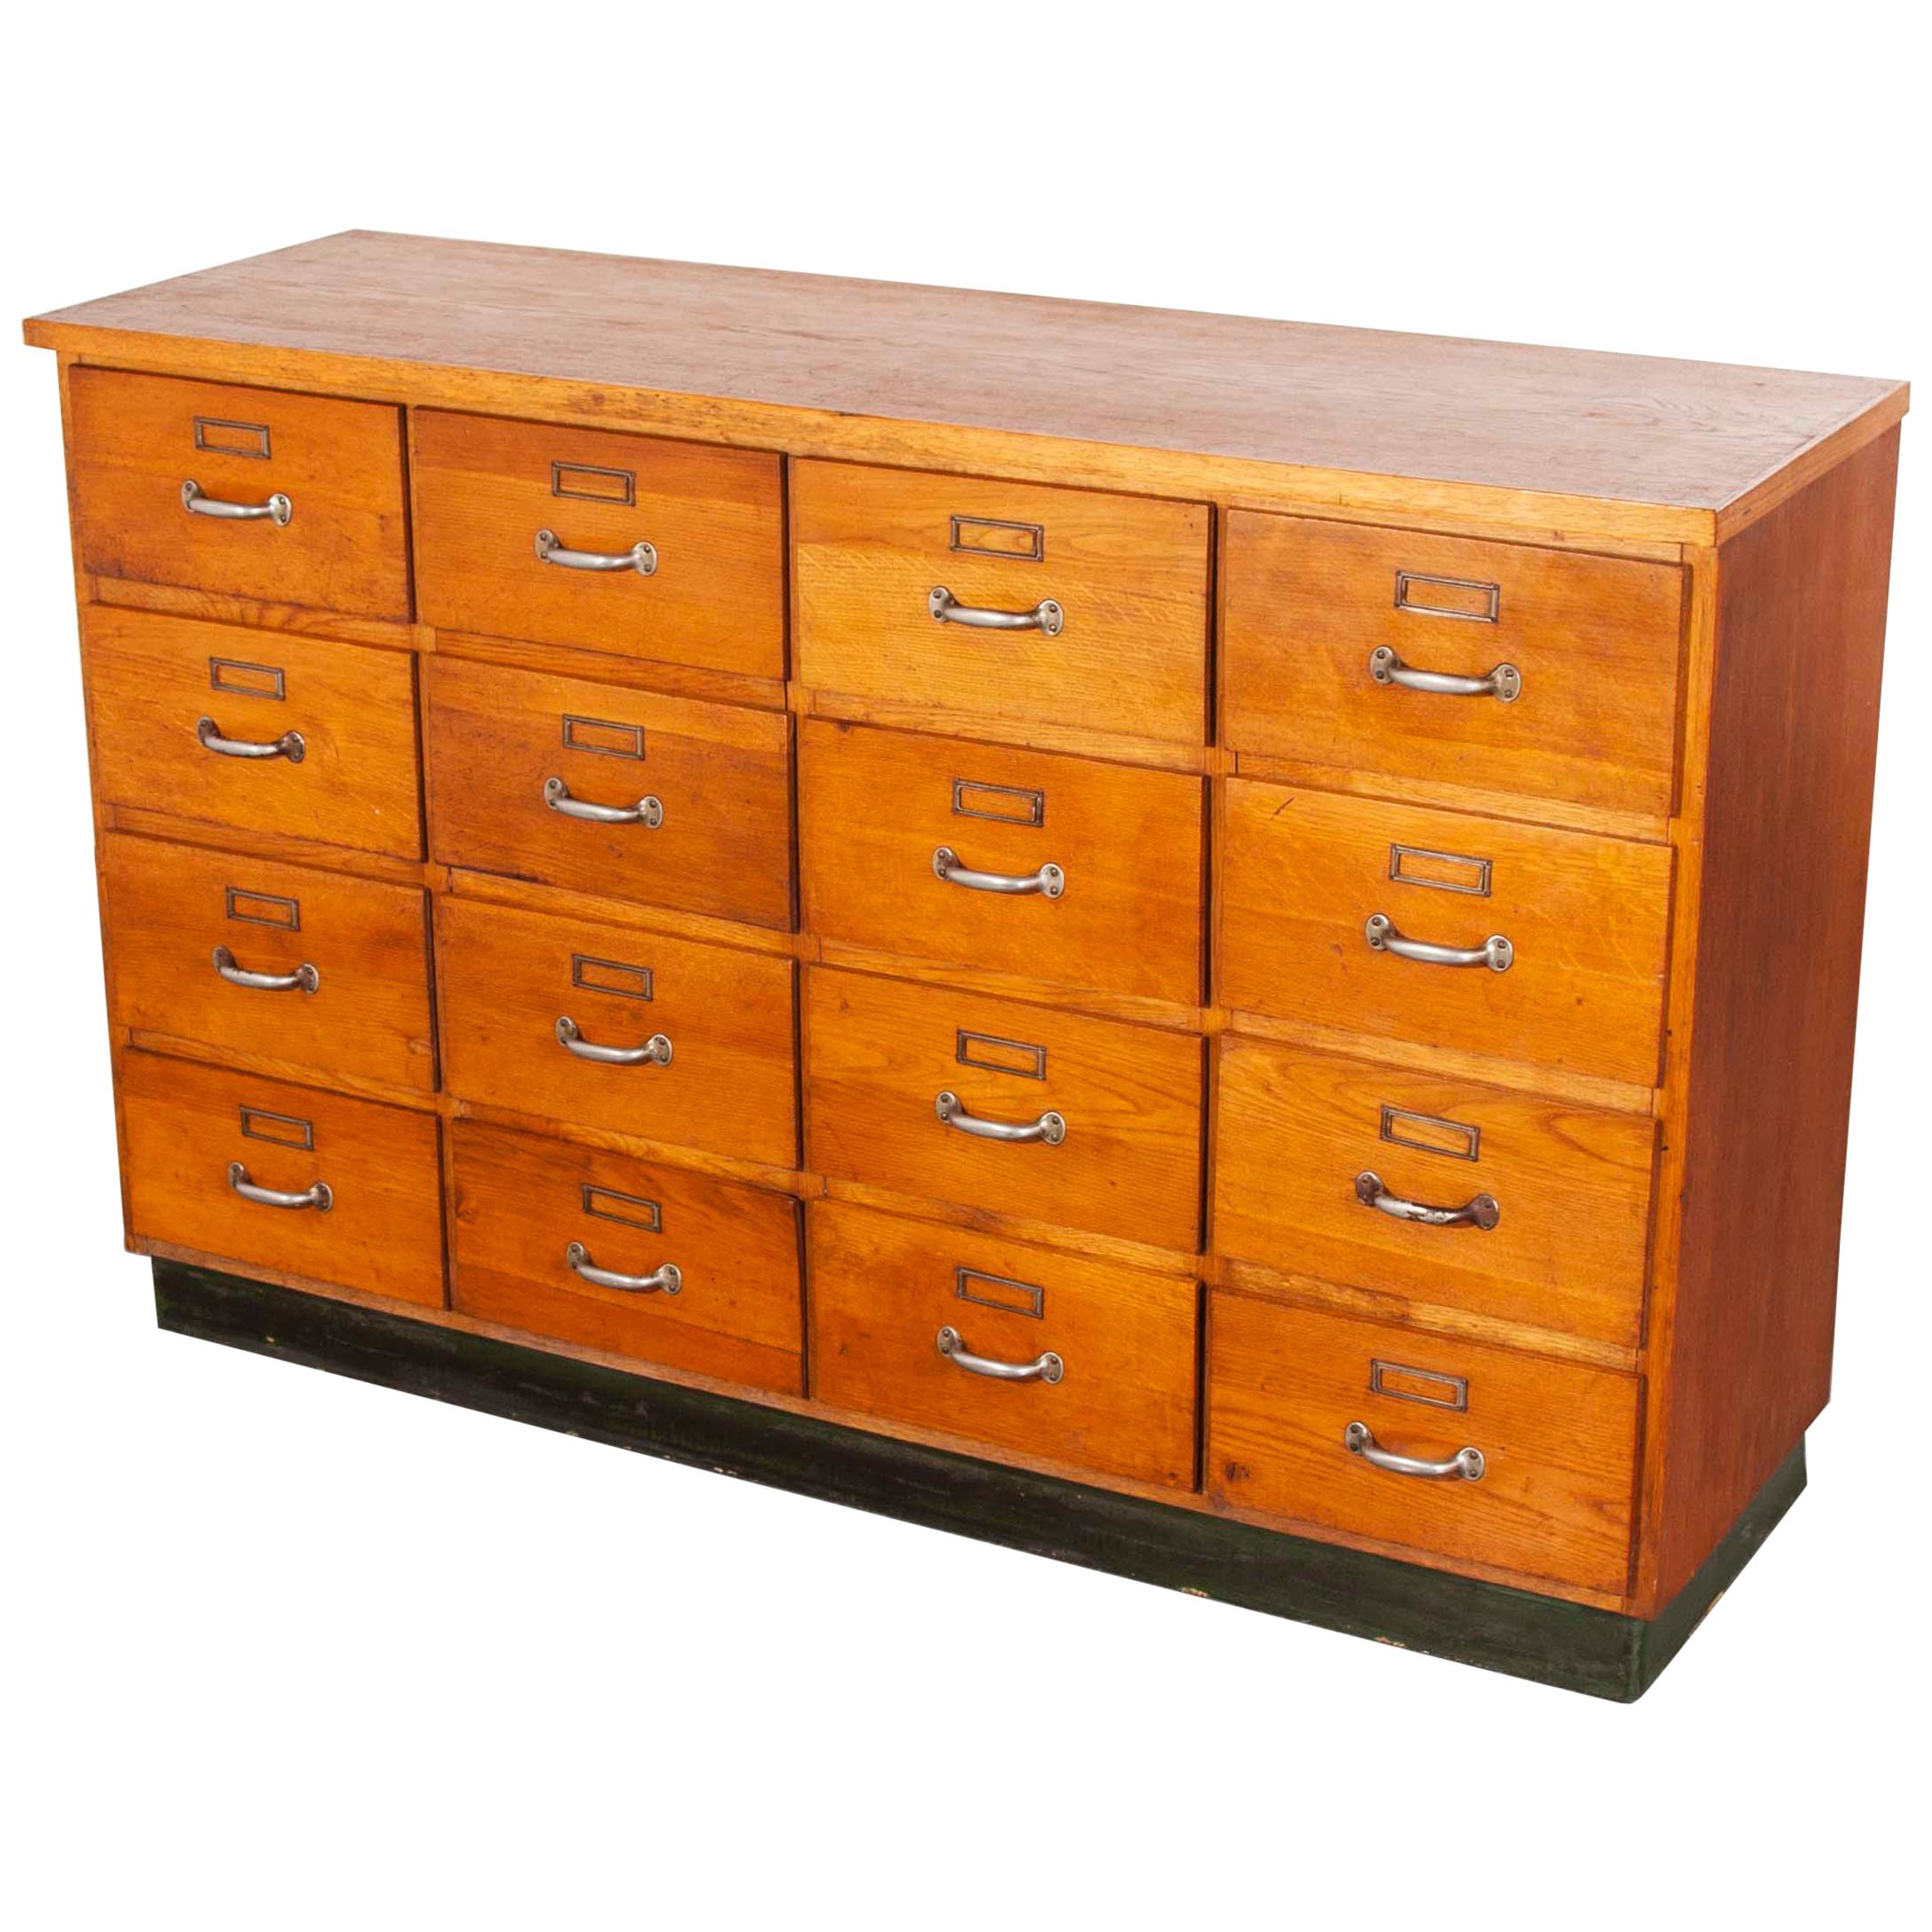 1950s Twelve-Drawer Original Oak Apothecary Cabinet, Chest of Drawers, German